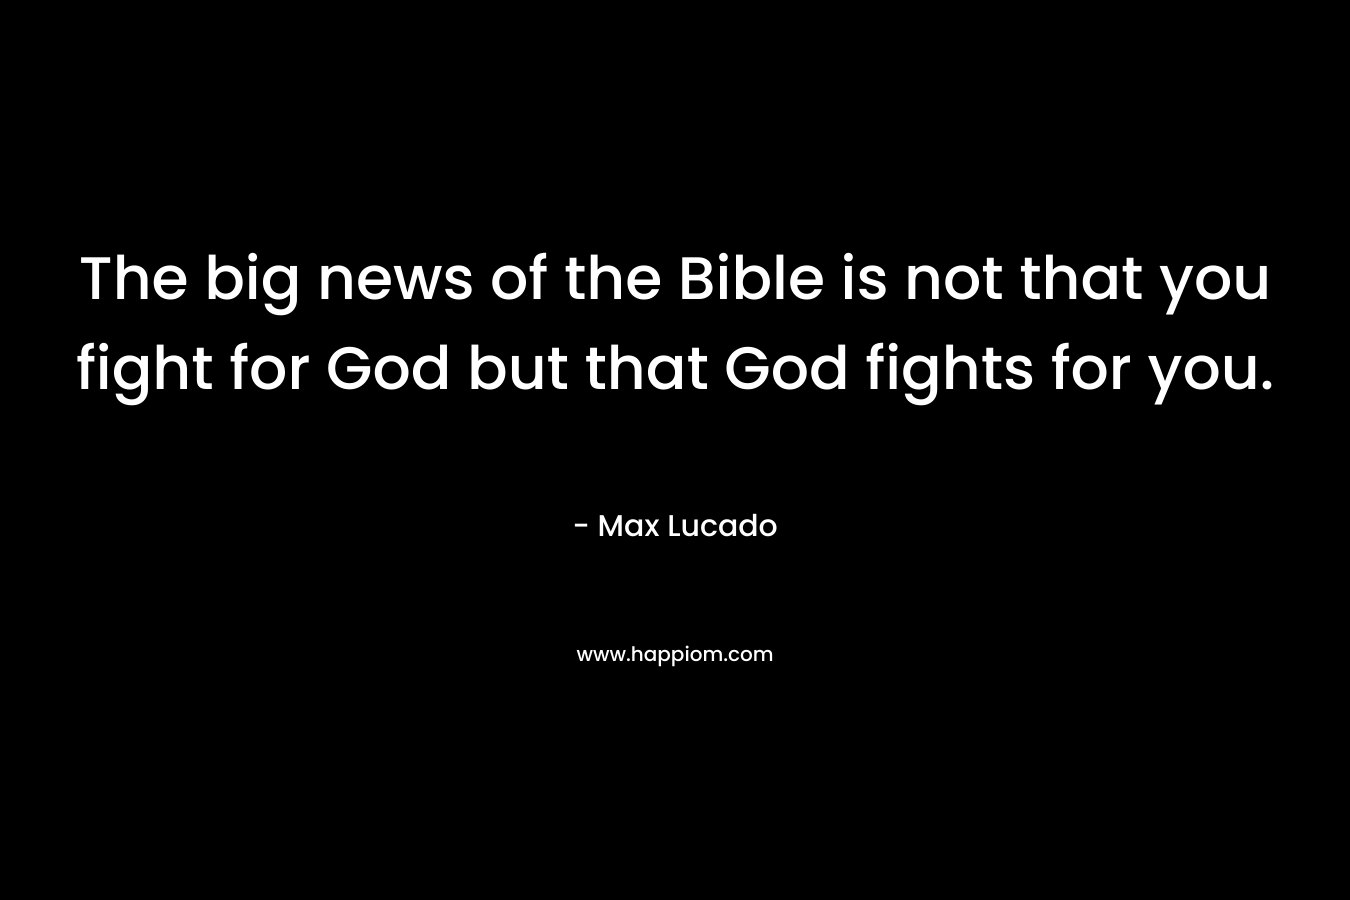 The big news of the Bible is not that you fight for God but that God fights for you.